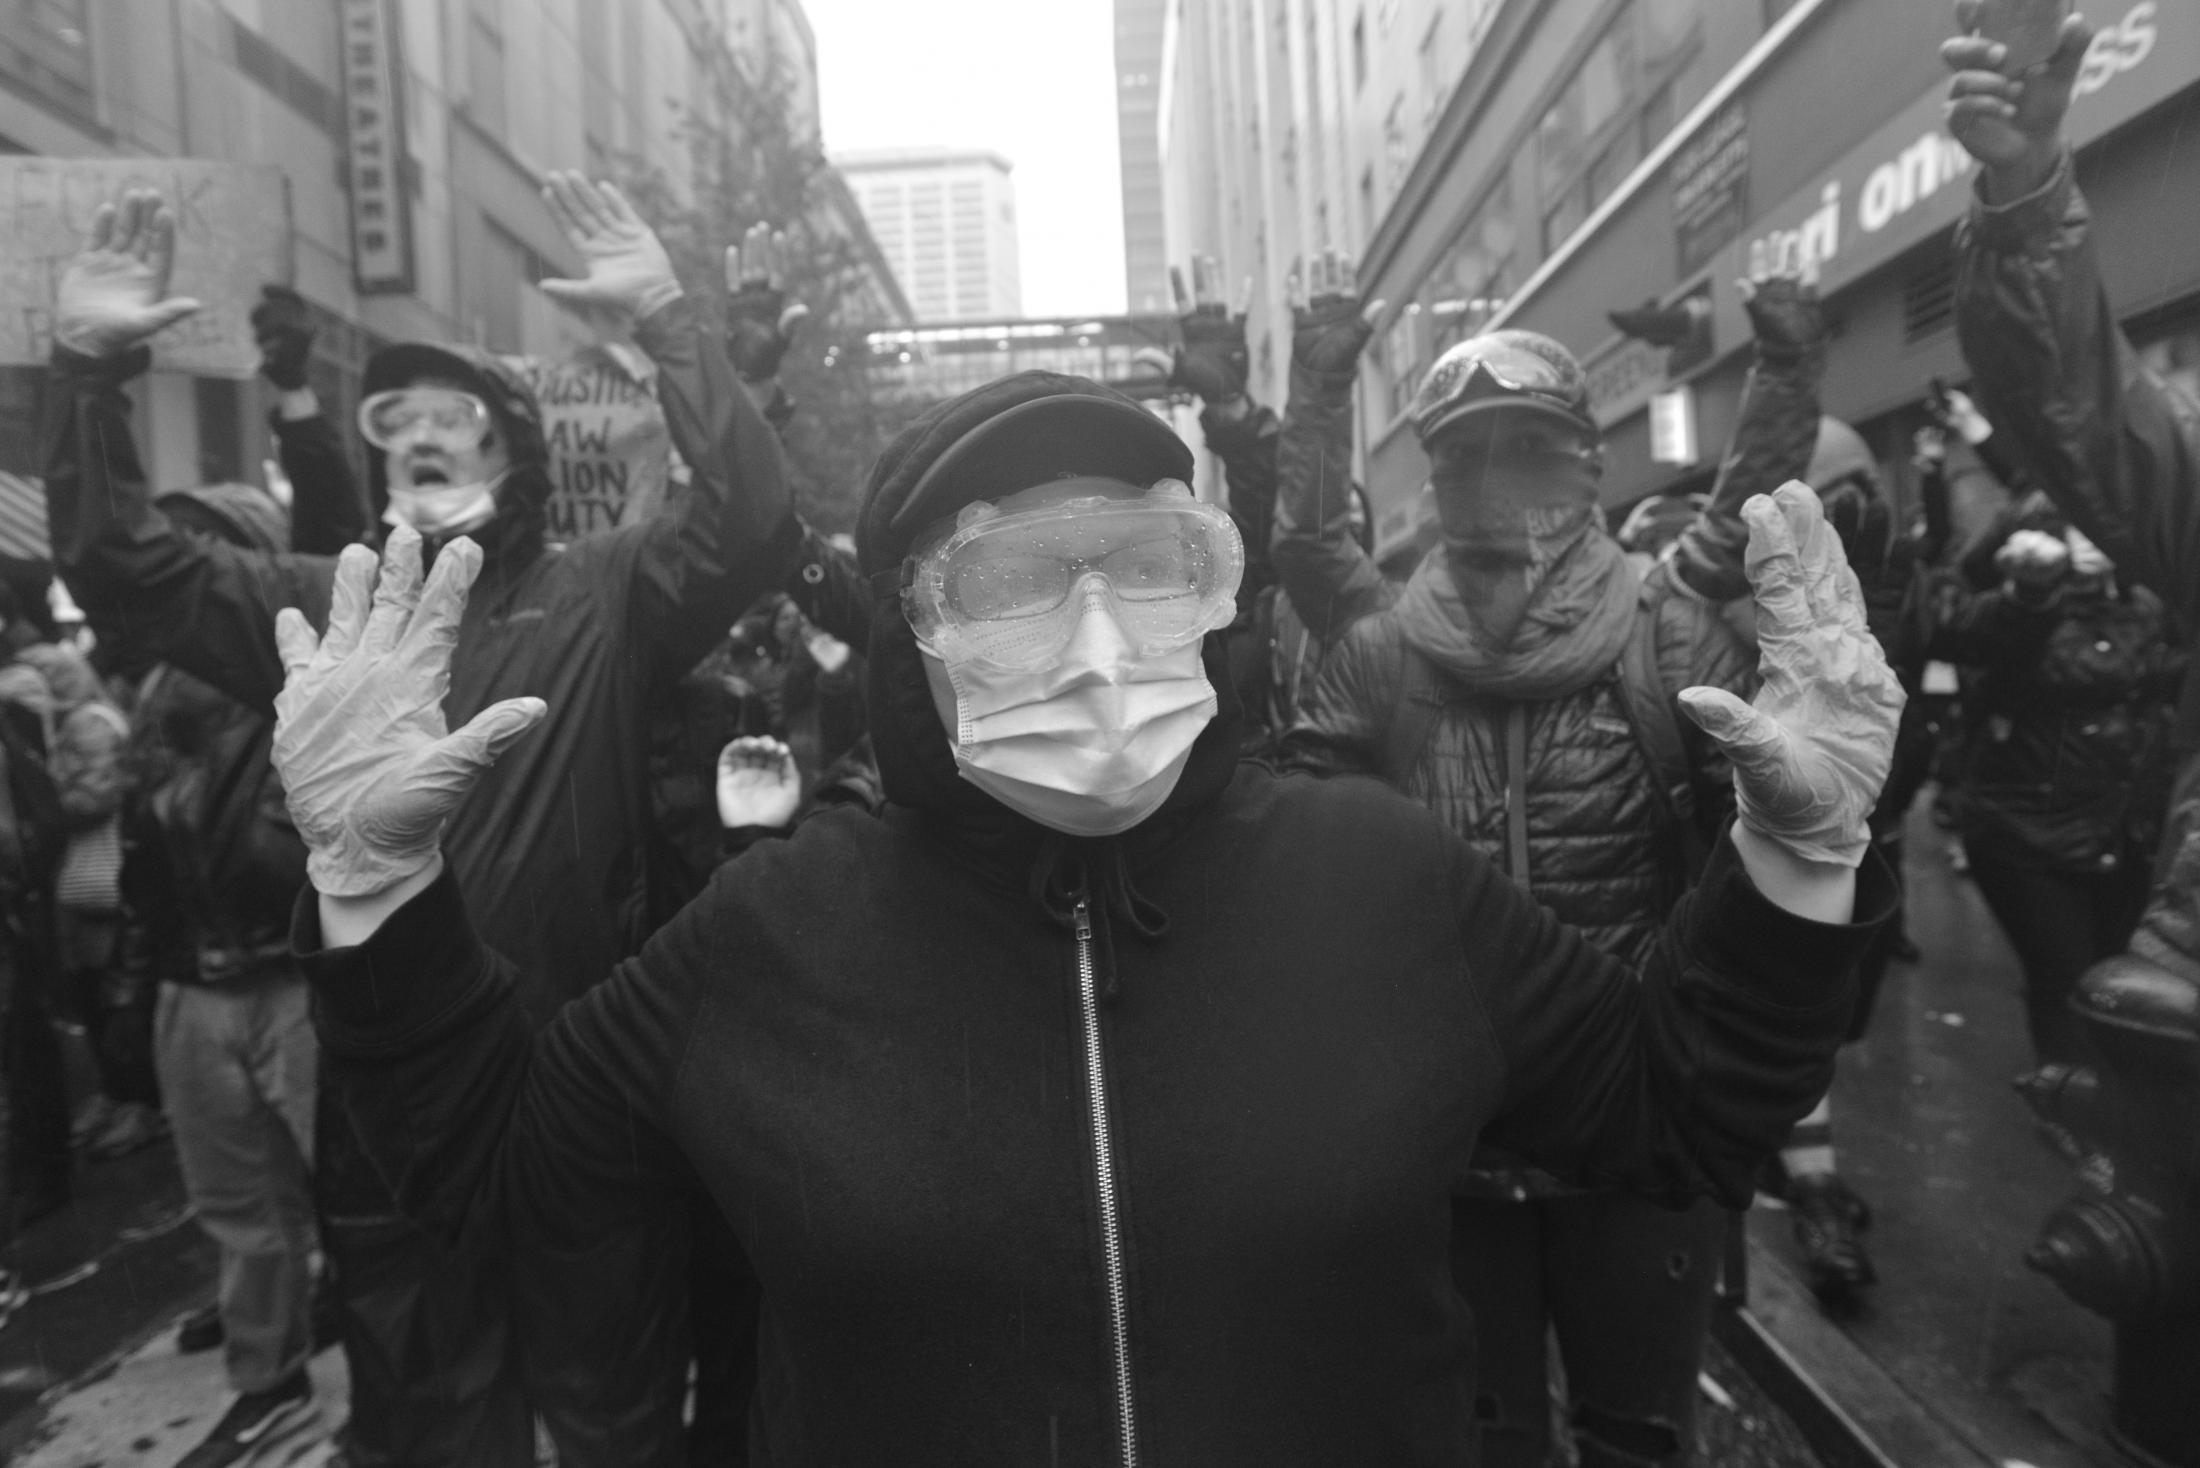 George Floyd Protests in Seattle, Washington - A protestor in Personal Protective Equipment. Despite the...